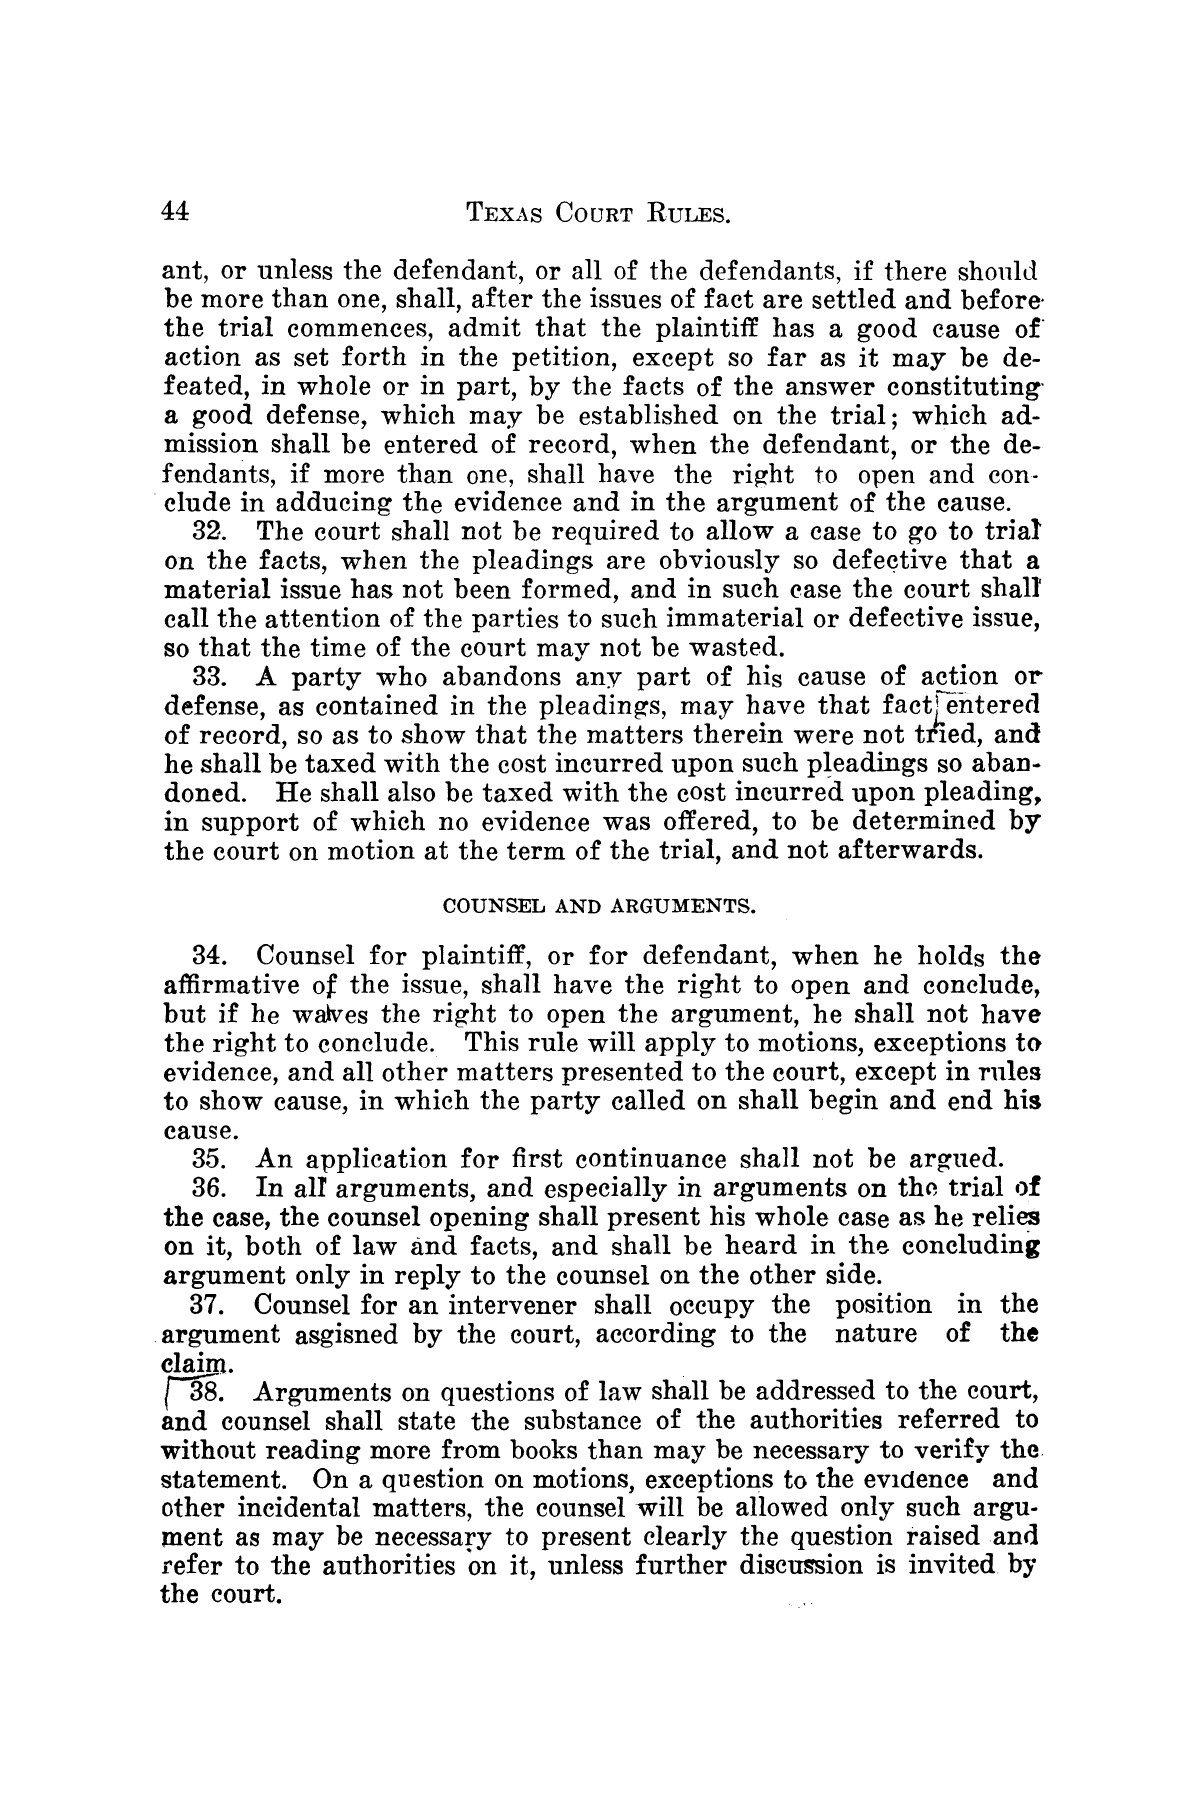 Gammel's Rules of the Courts of Texas
                                                
                                                    [Sequence #]: 44 of 70
                                                